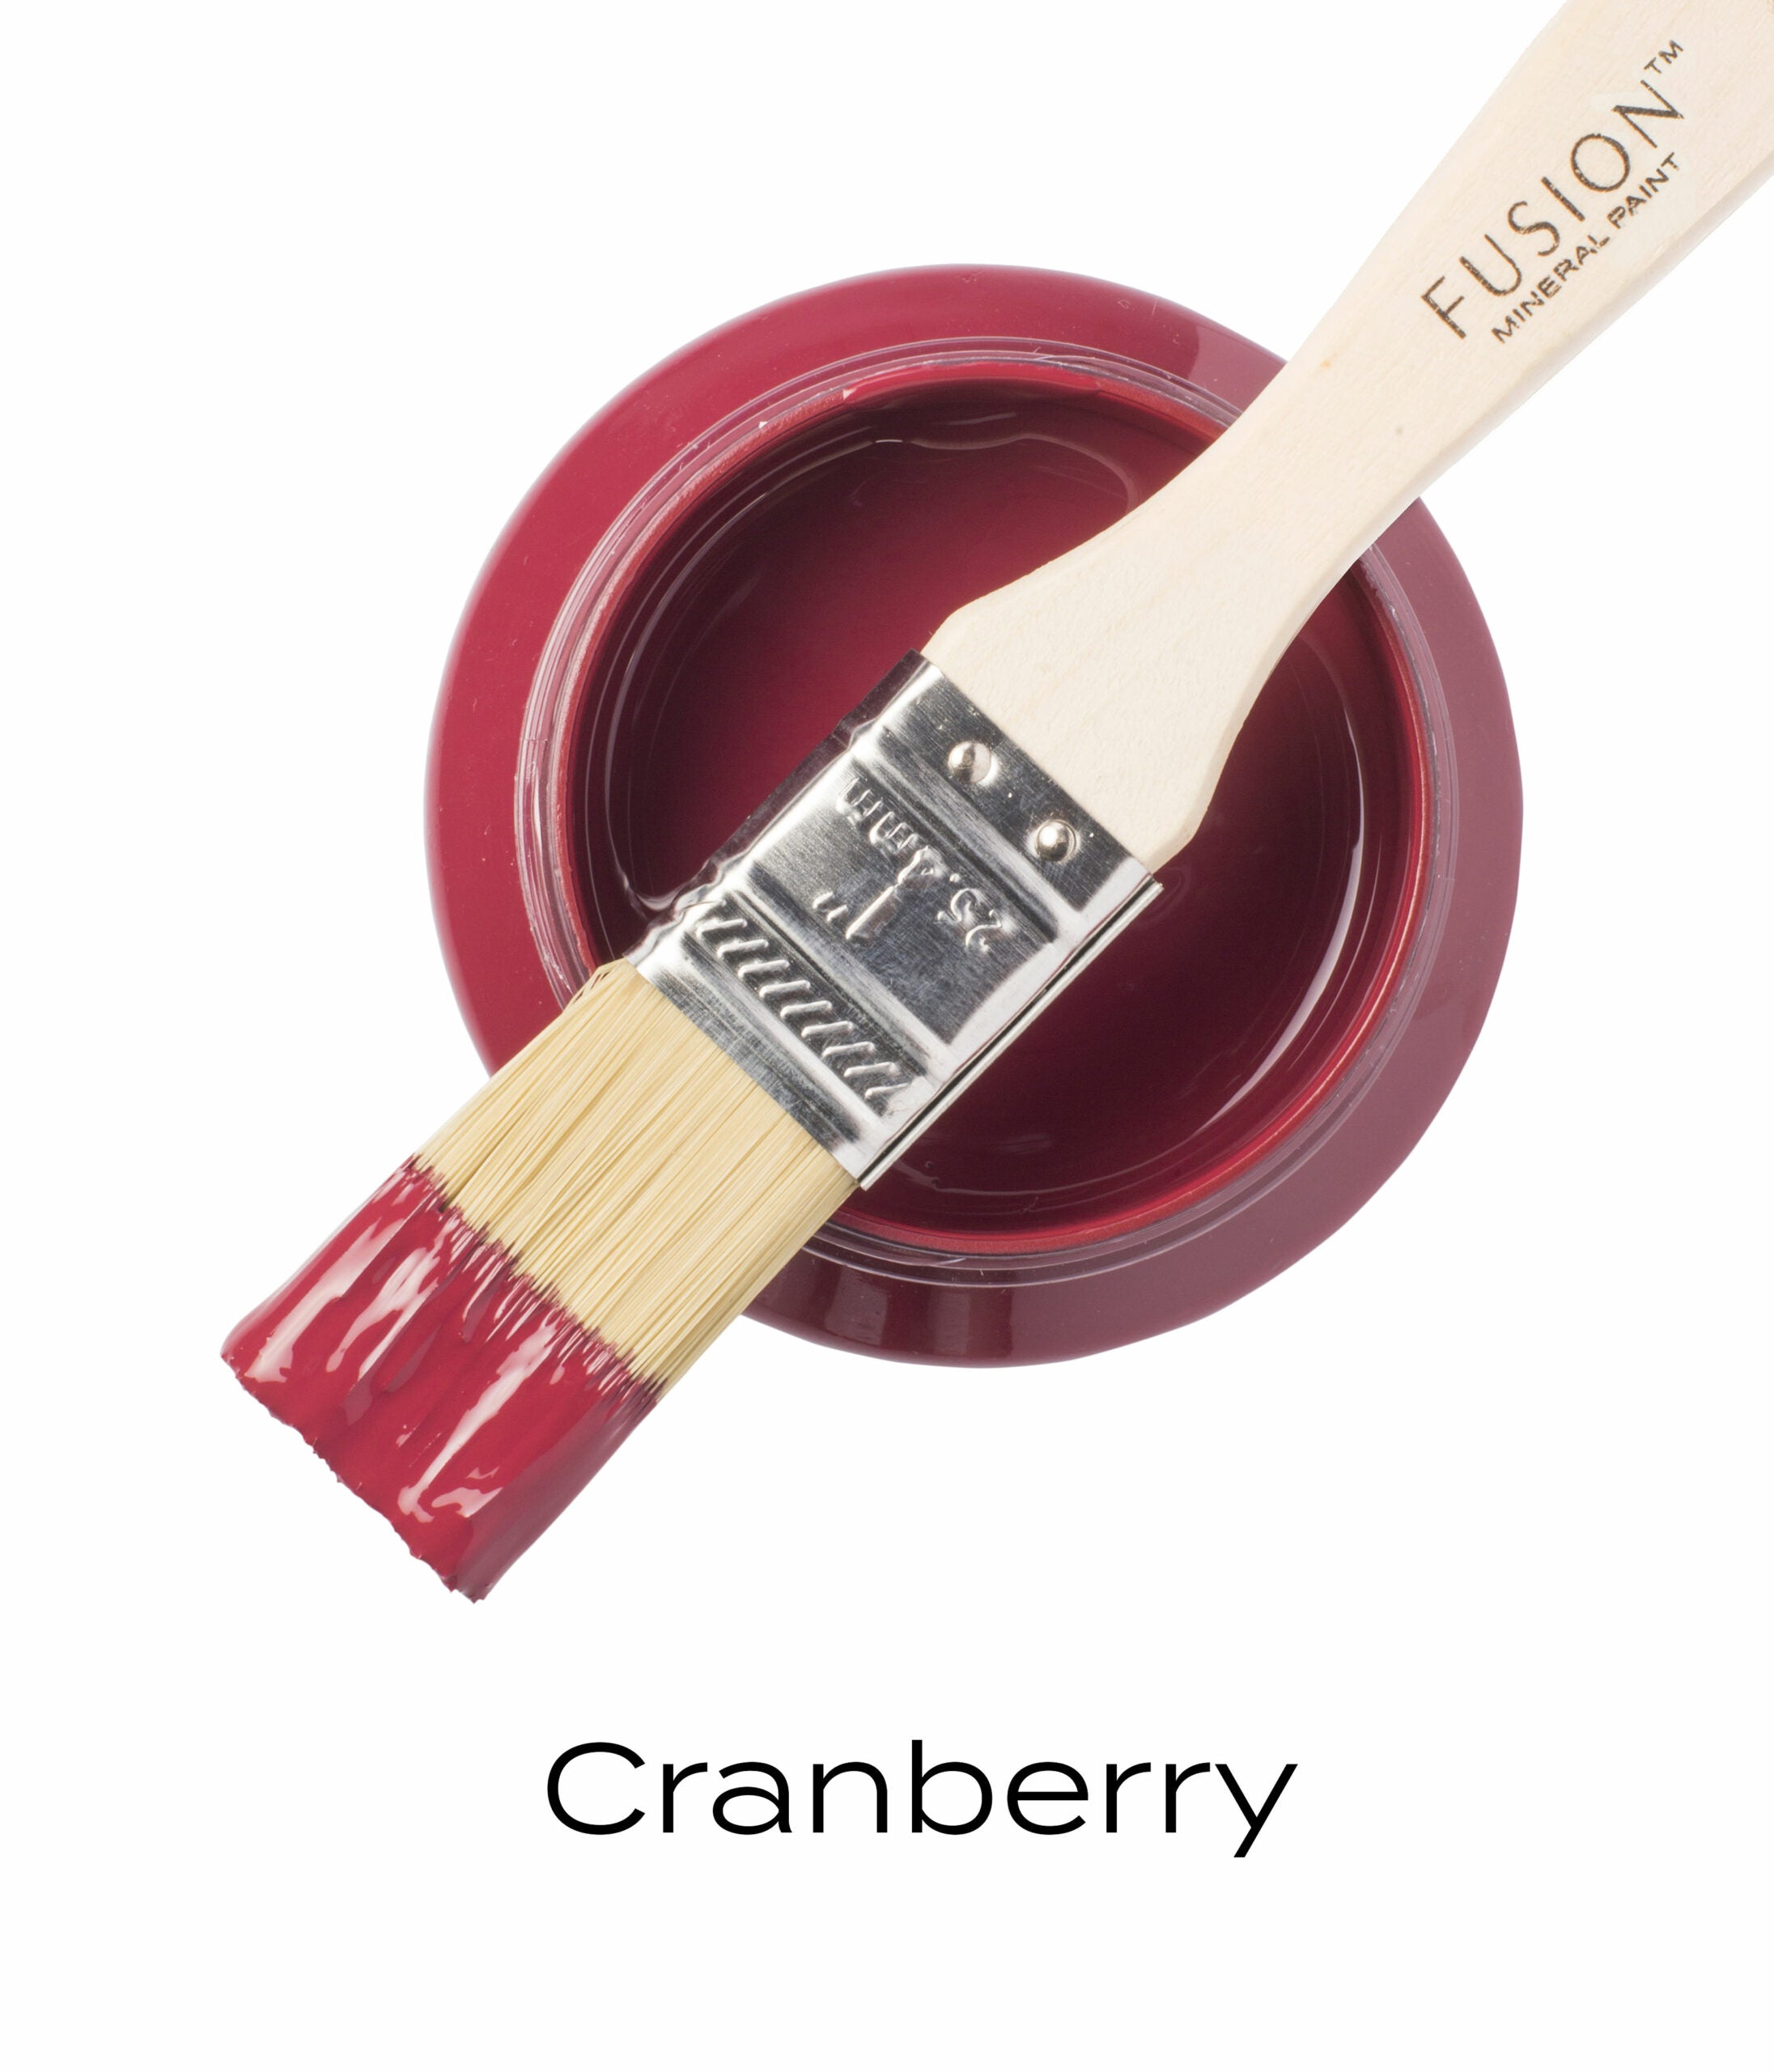 Fusion Mineral Paint Cranberry brush and pint